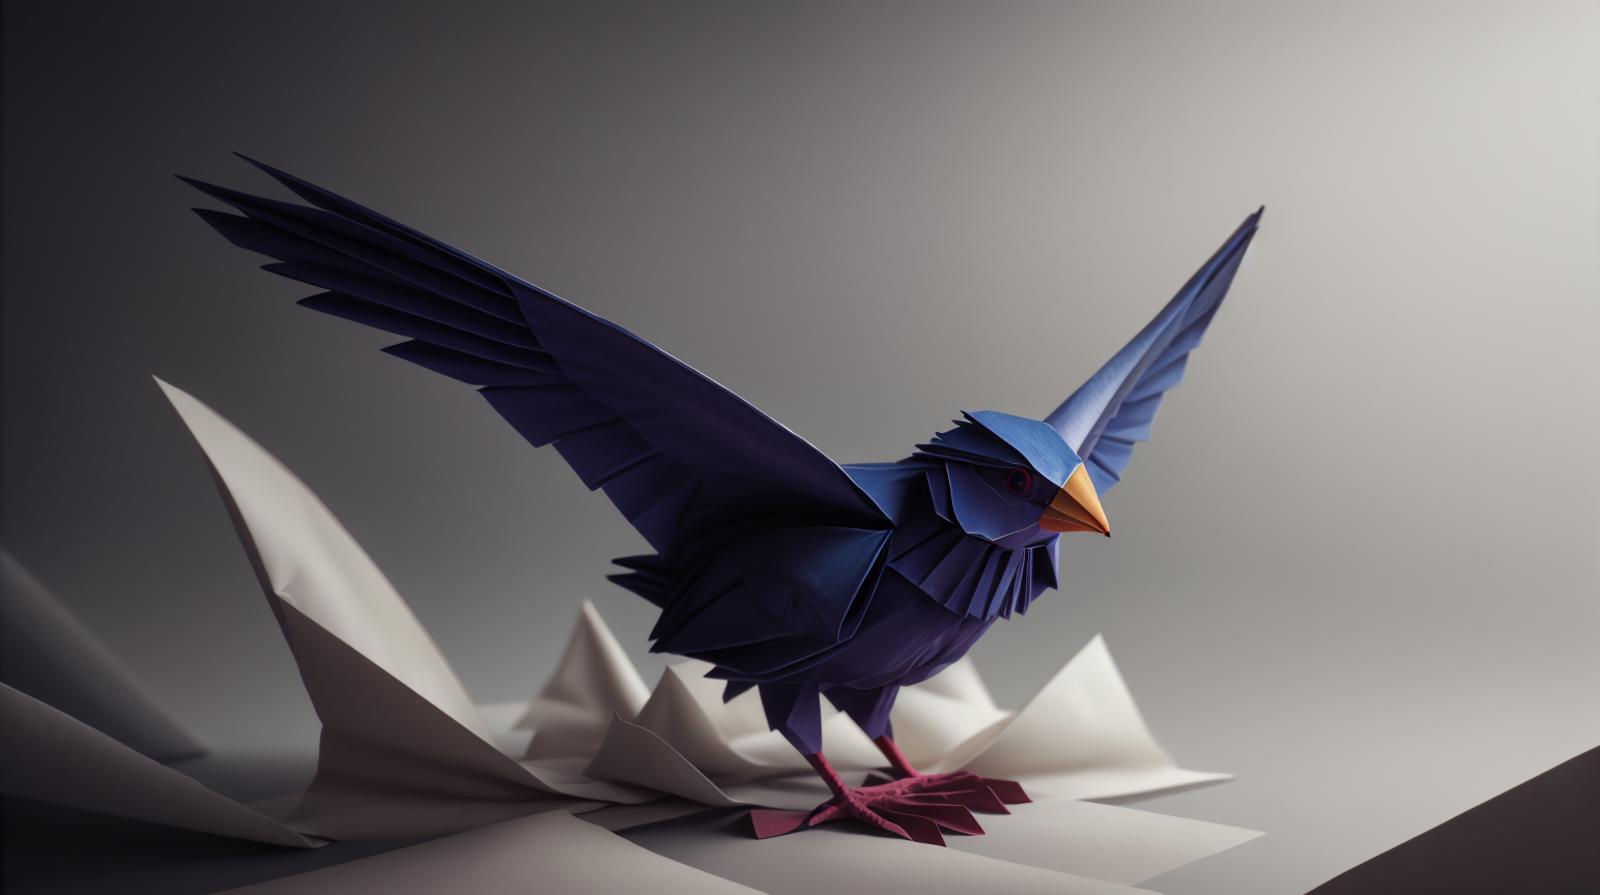 World of Origami image by mnemic